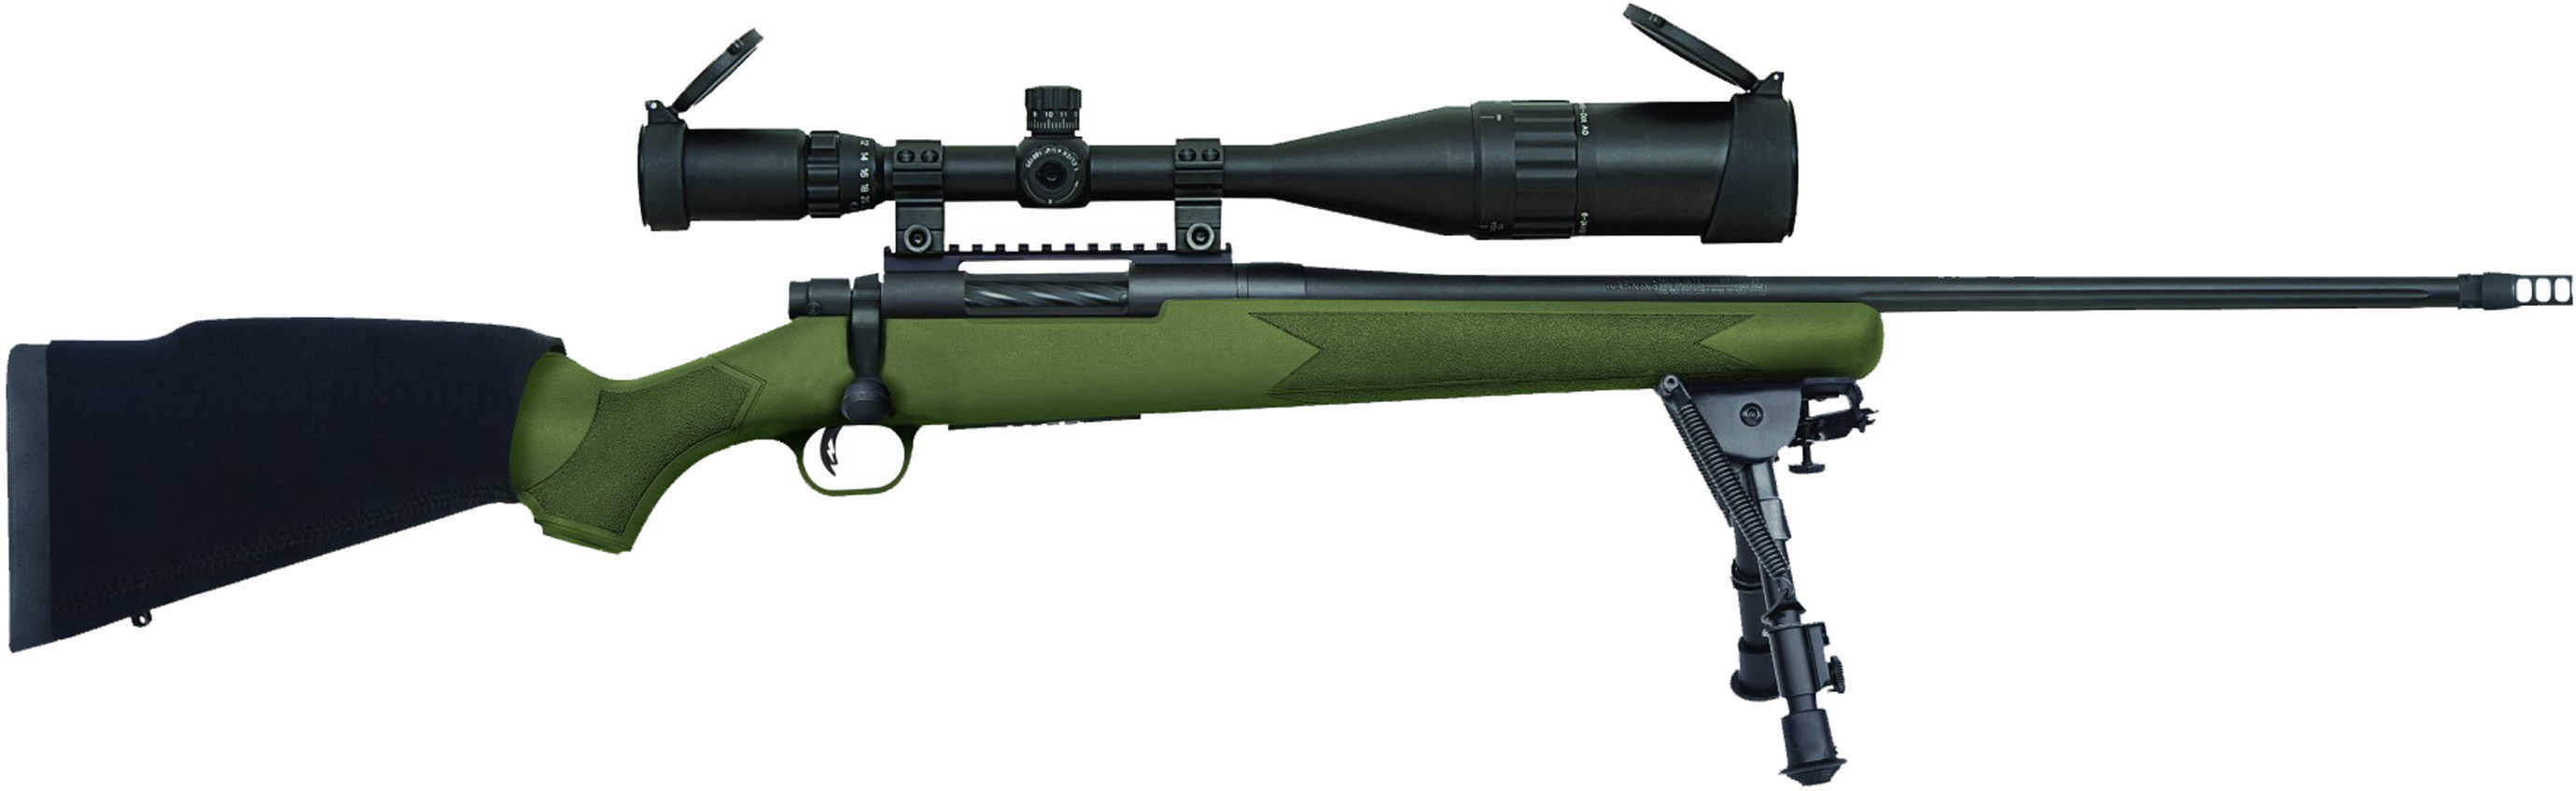 Mossberg Patriot Night Train 308 Winchester OD Green 22"Matte Blued Barrel 5 Round Stock Bolt Action Rifle